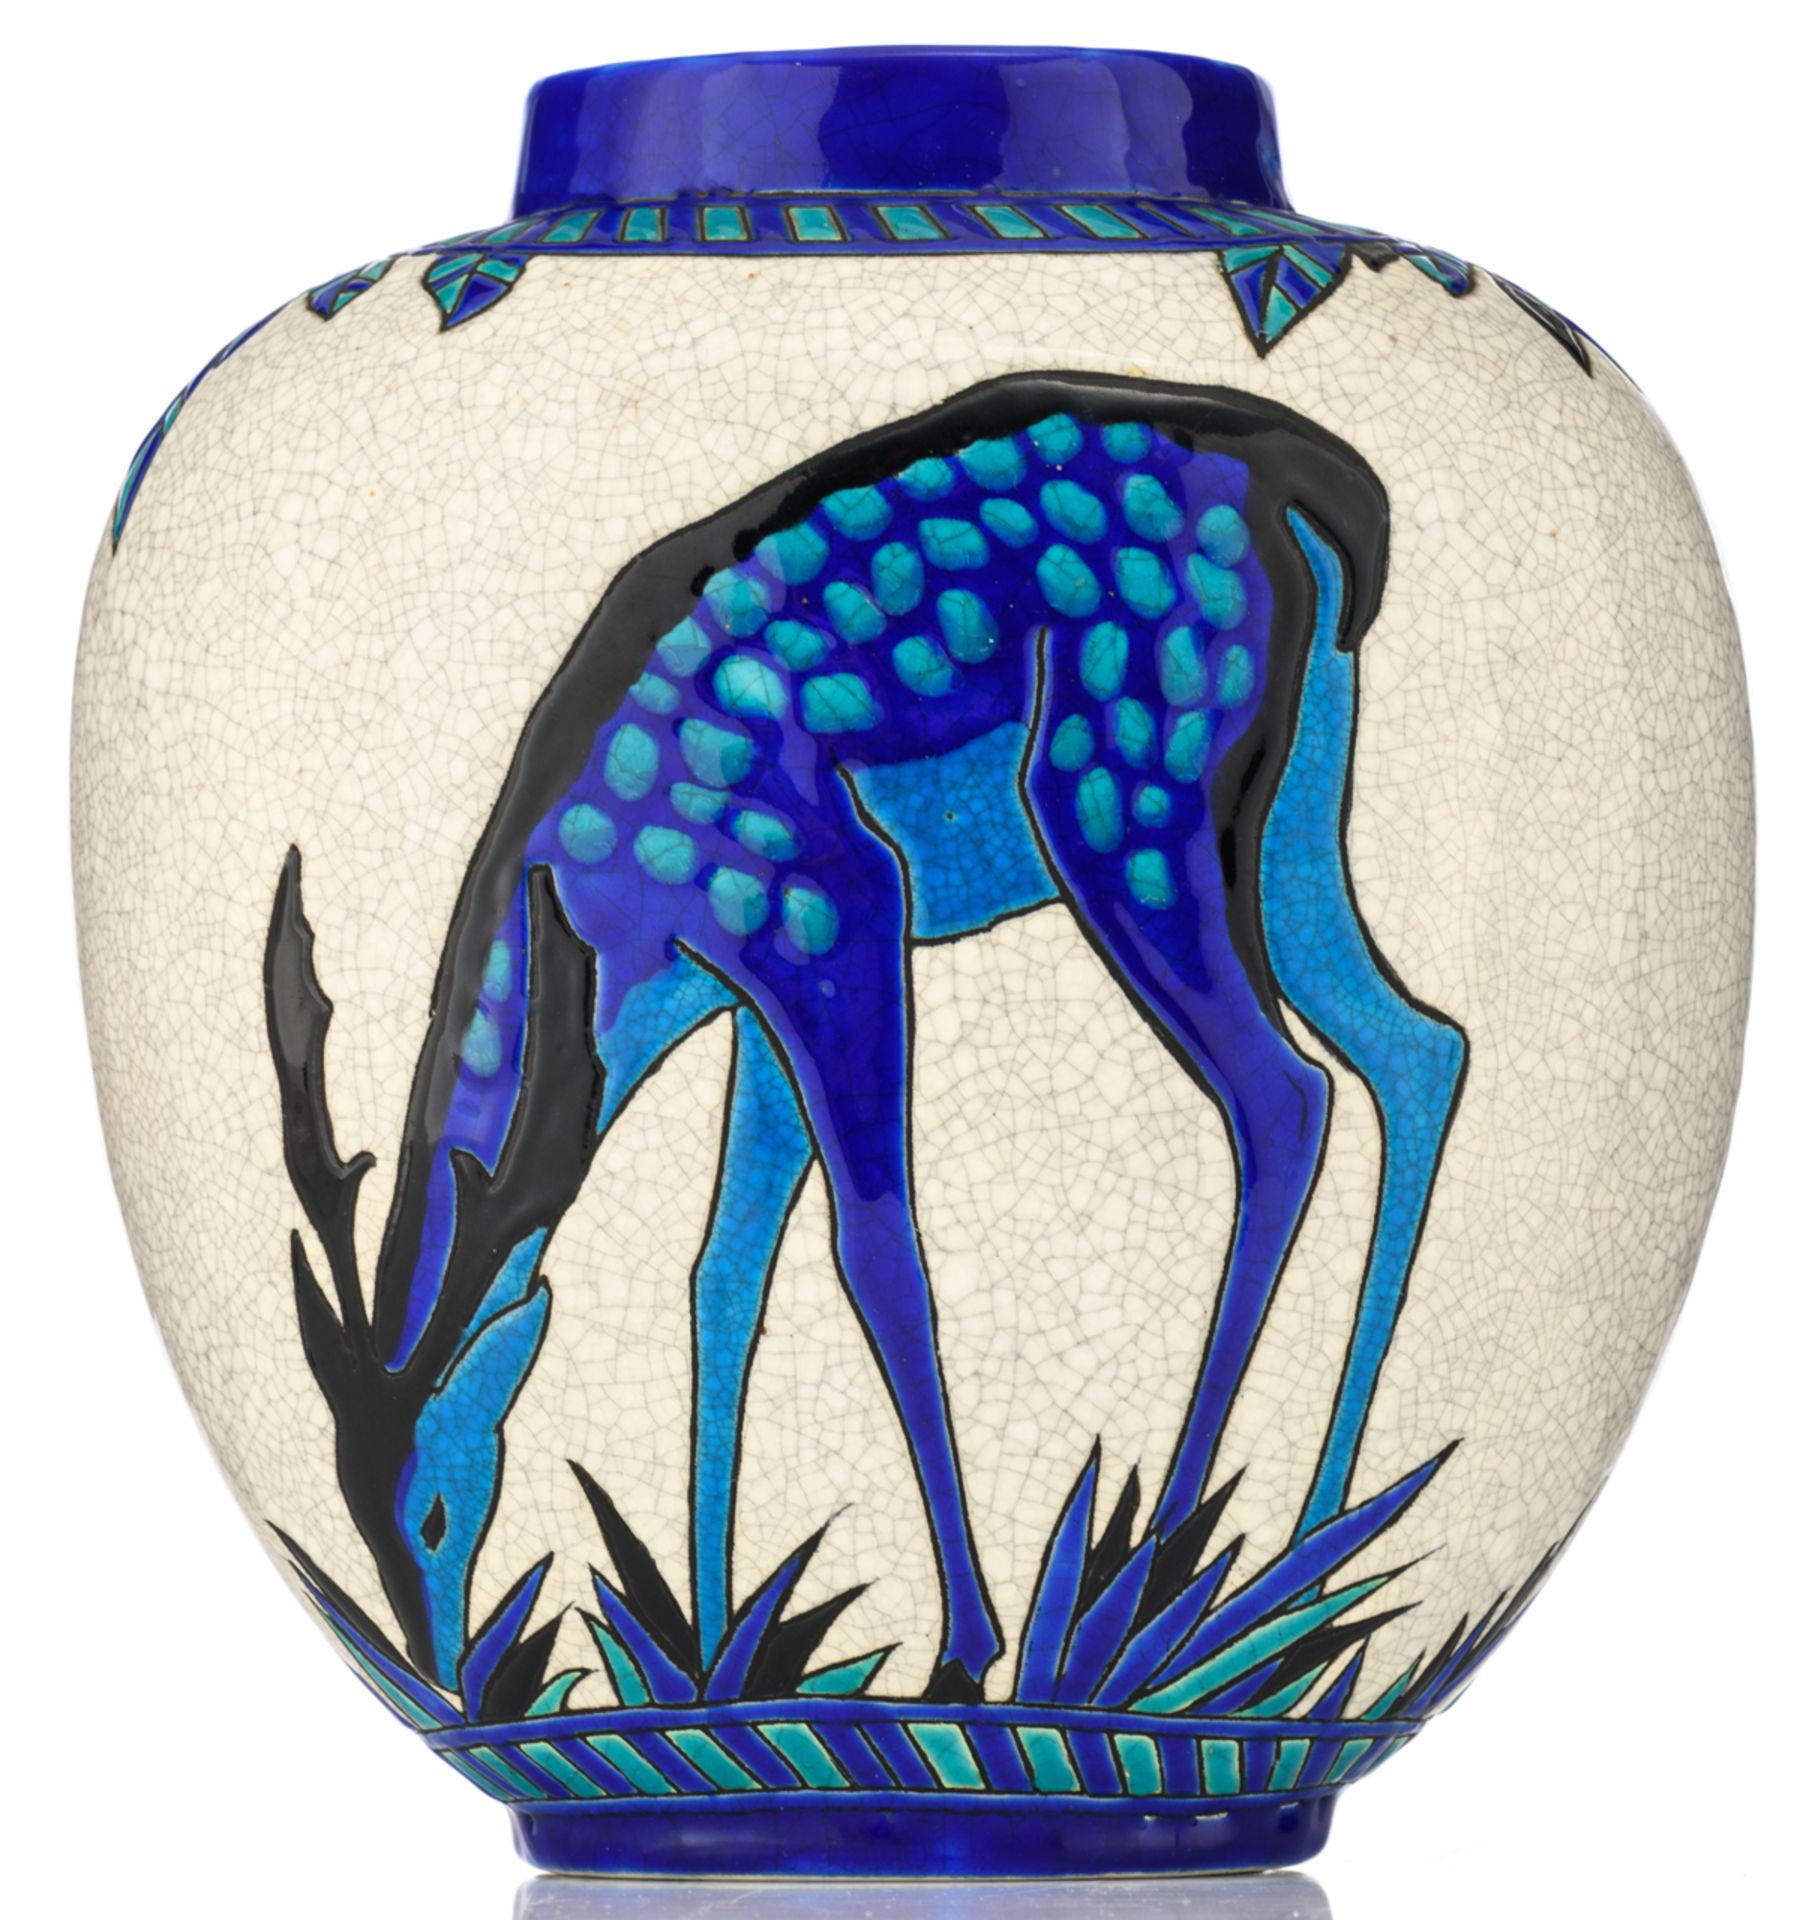 An Art Deco crackled and polychrome decorated ceramic vase with eating deer, Royal Boch - Keramis, - Image 3 of 7